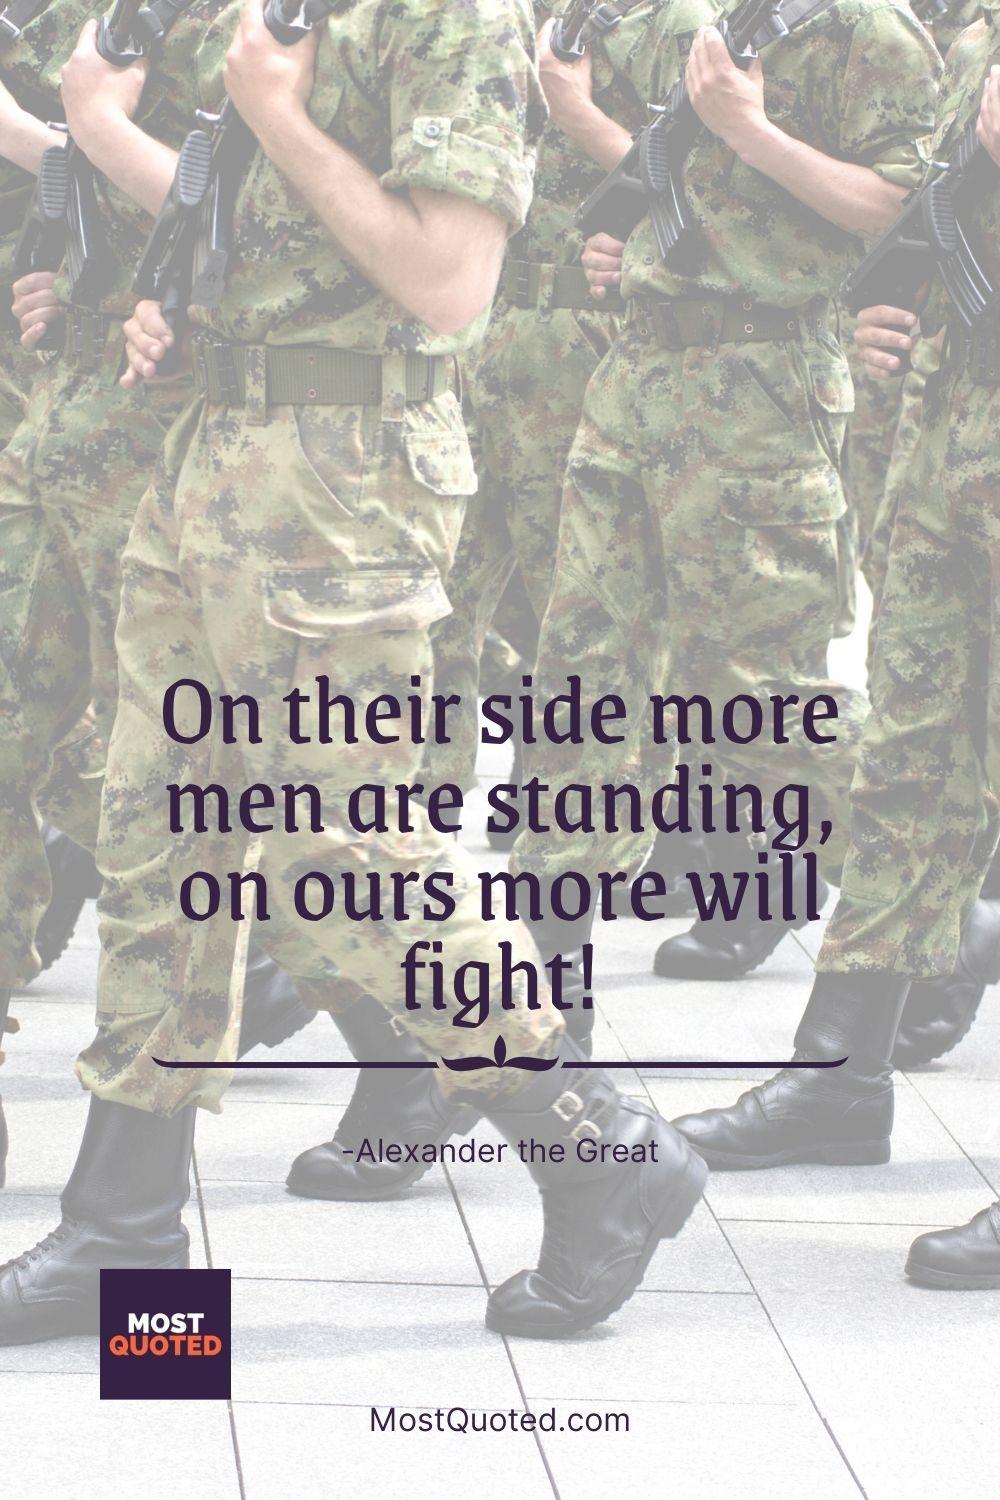 On their side more men are standing, on ours more will fight! - Alexander the Great